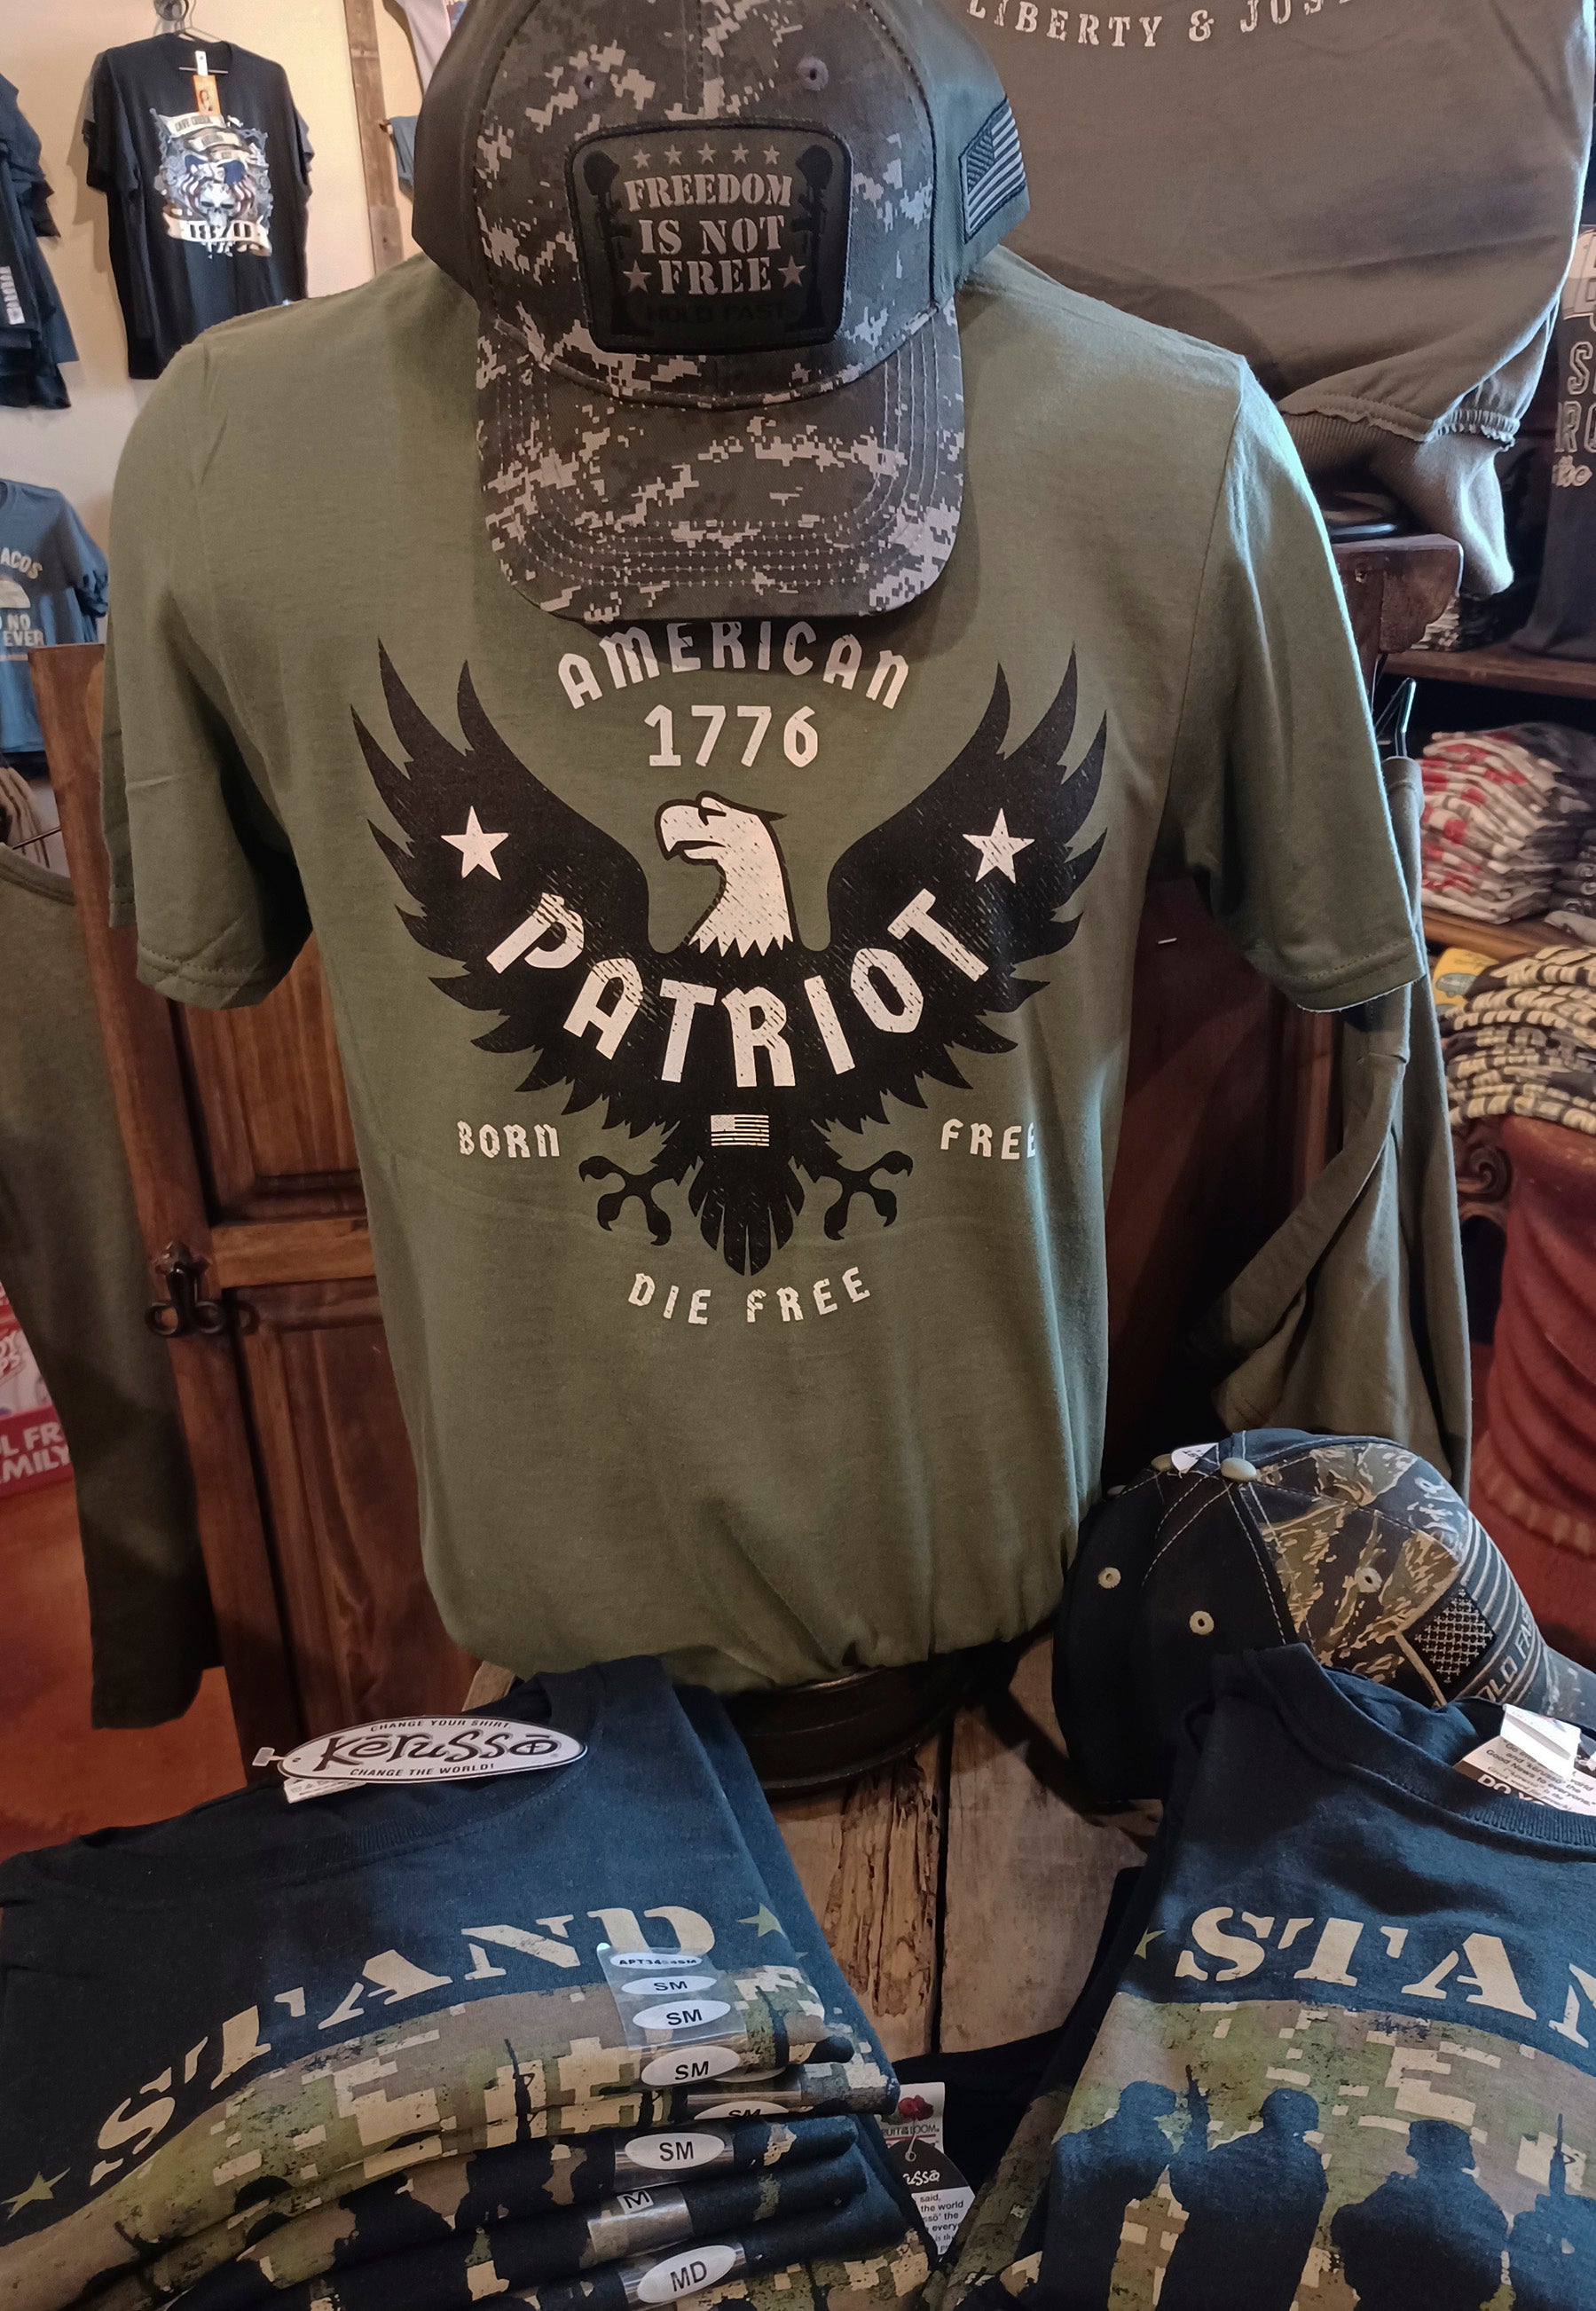 American patriot shirt on sale in store